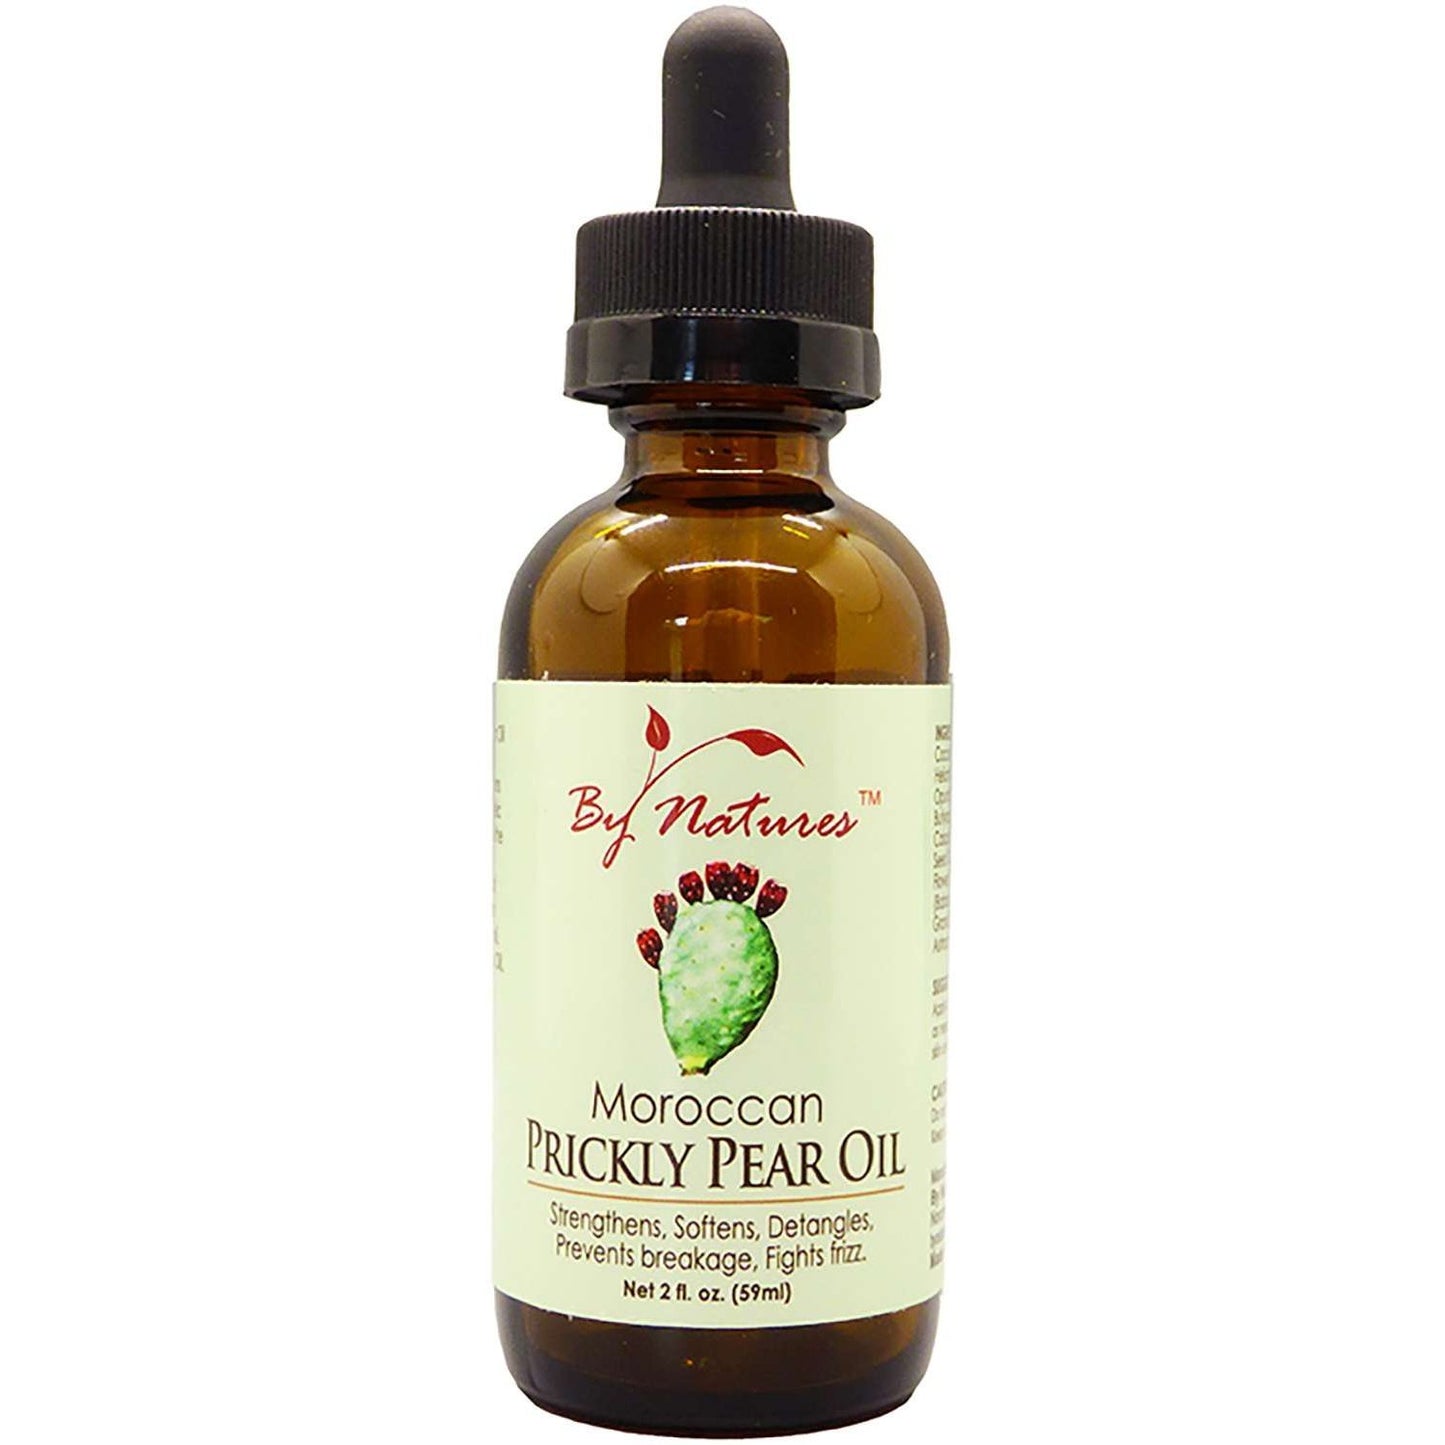 By Nature Moroccan Prickly Pear Oil